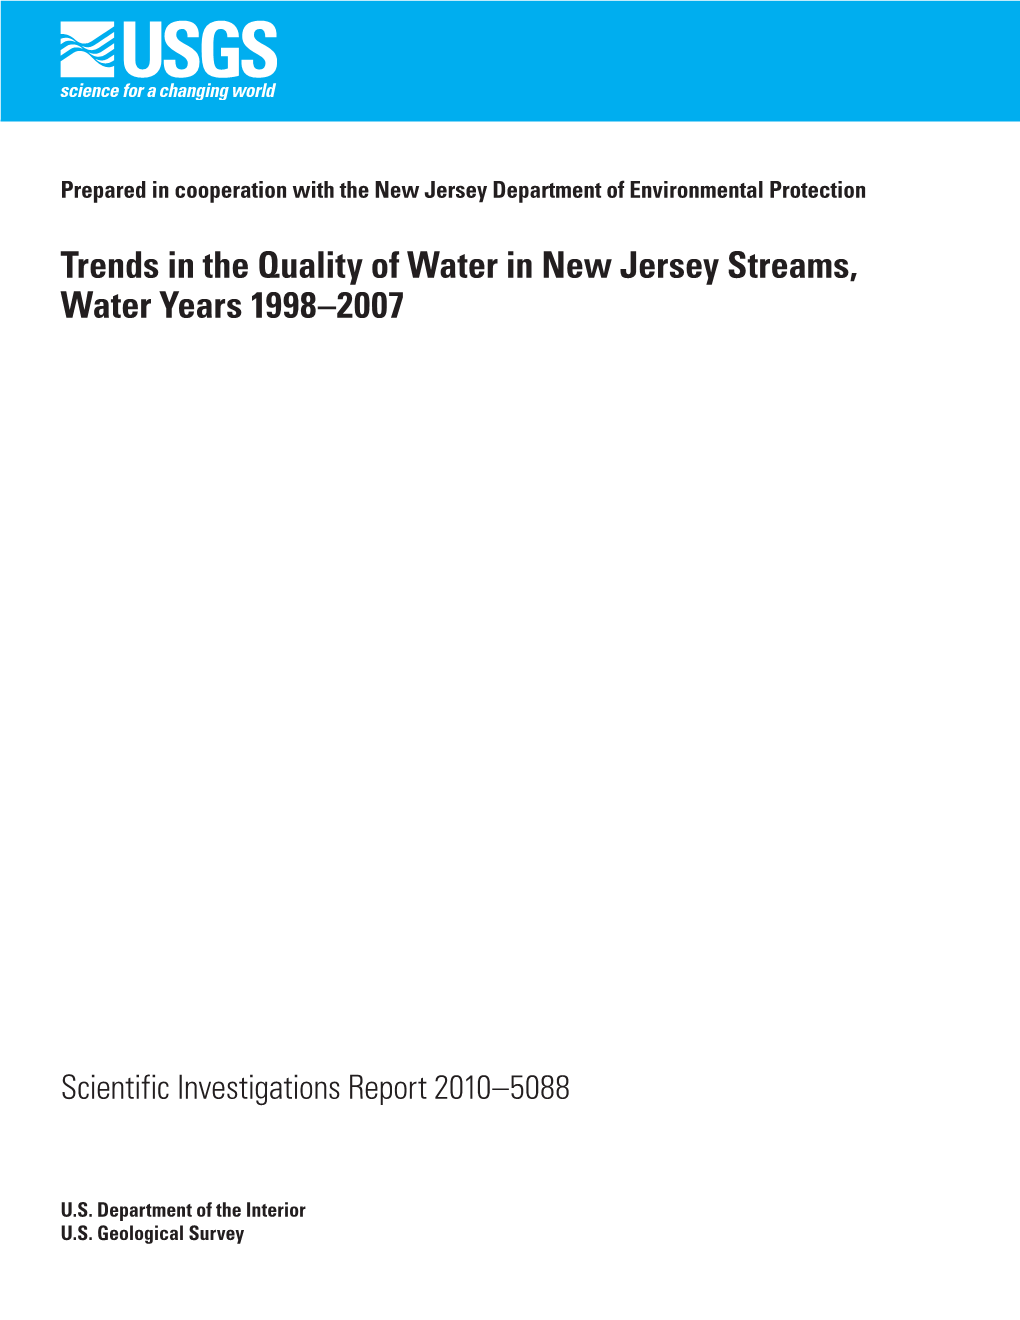 Trends in the Quality of Water in New Jersey Streams, Water Years 1998-2007